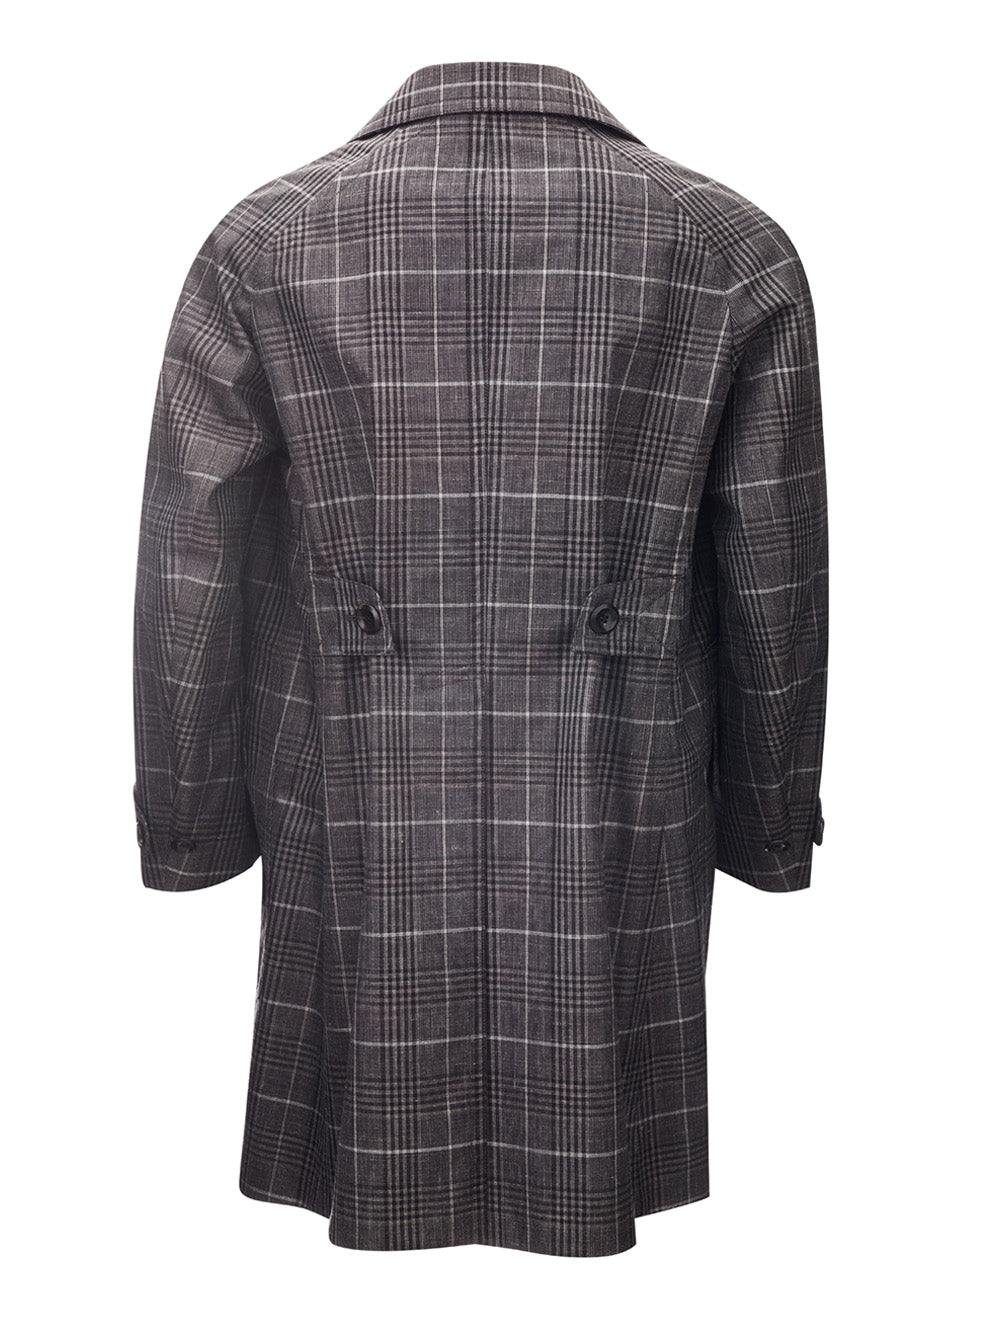 Tom Ford Grey Checked Mid-Length Trench